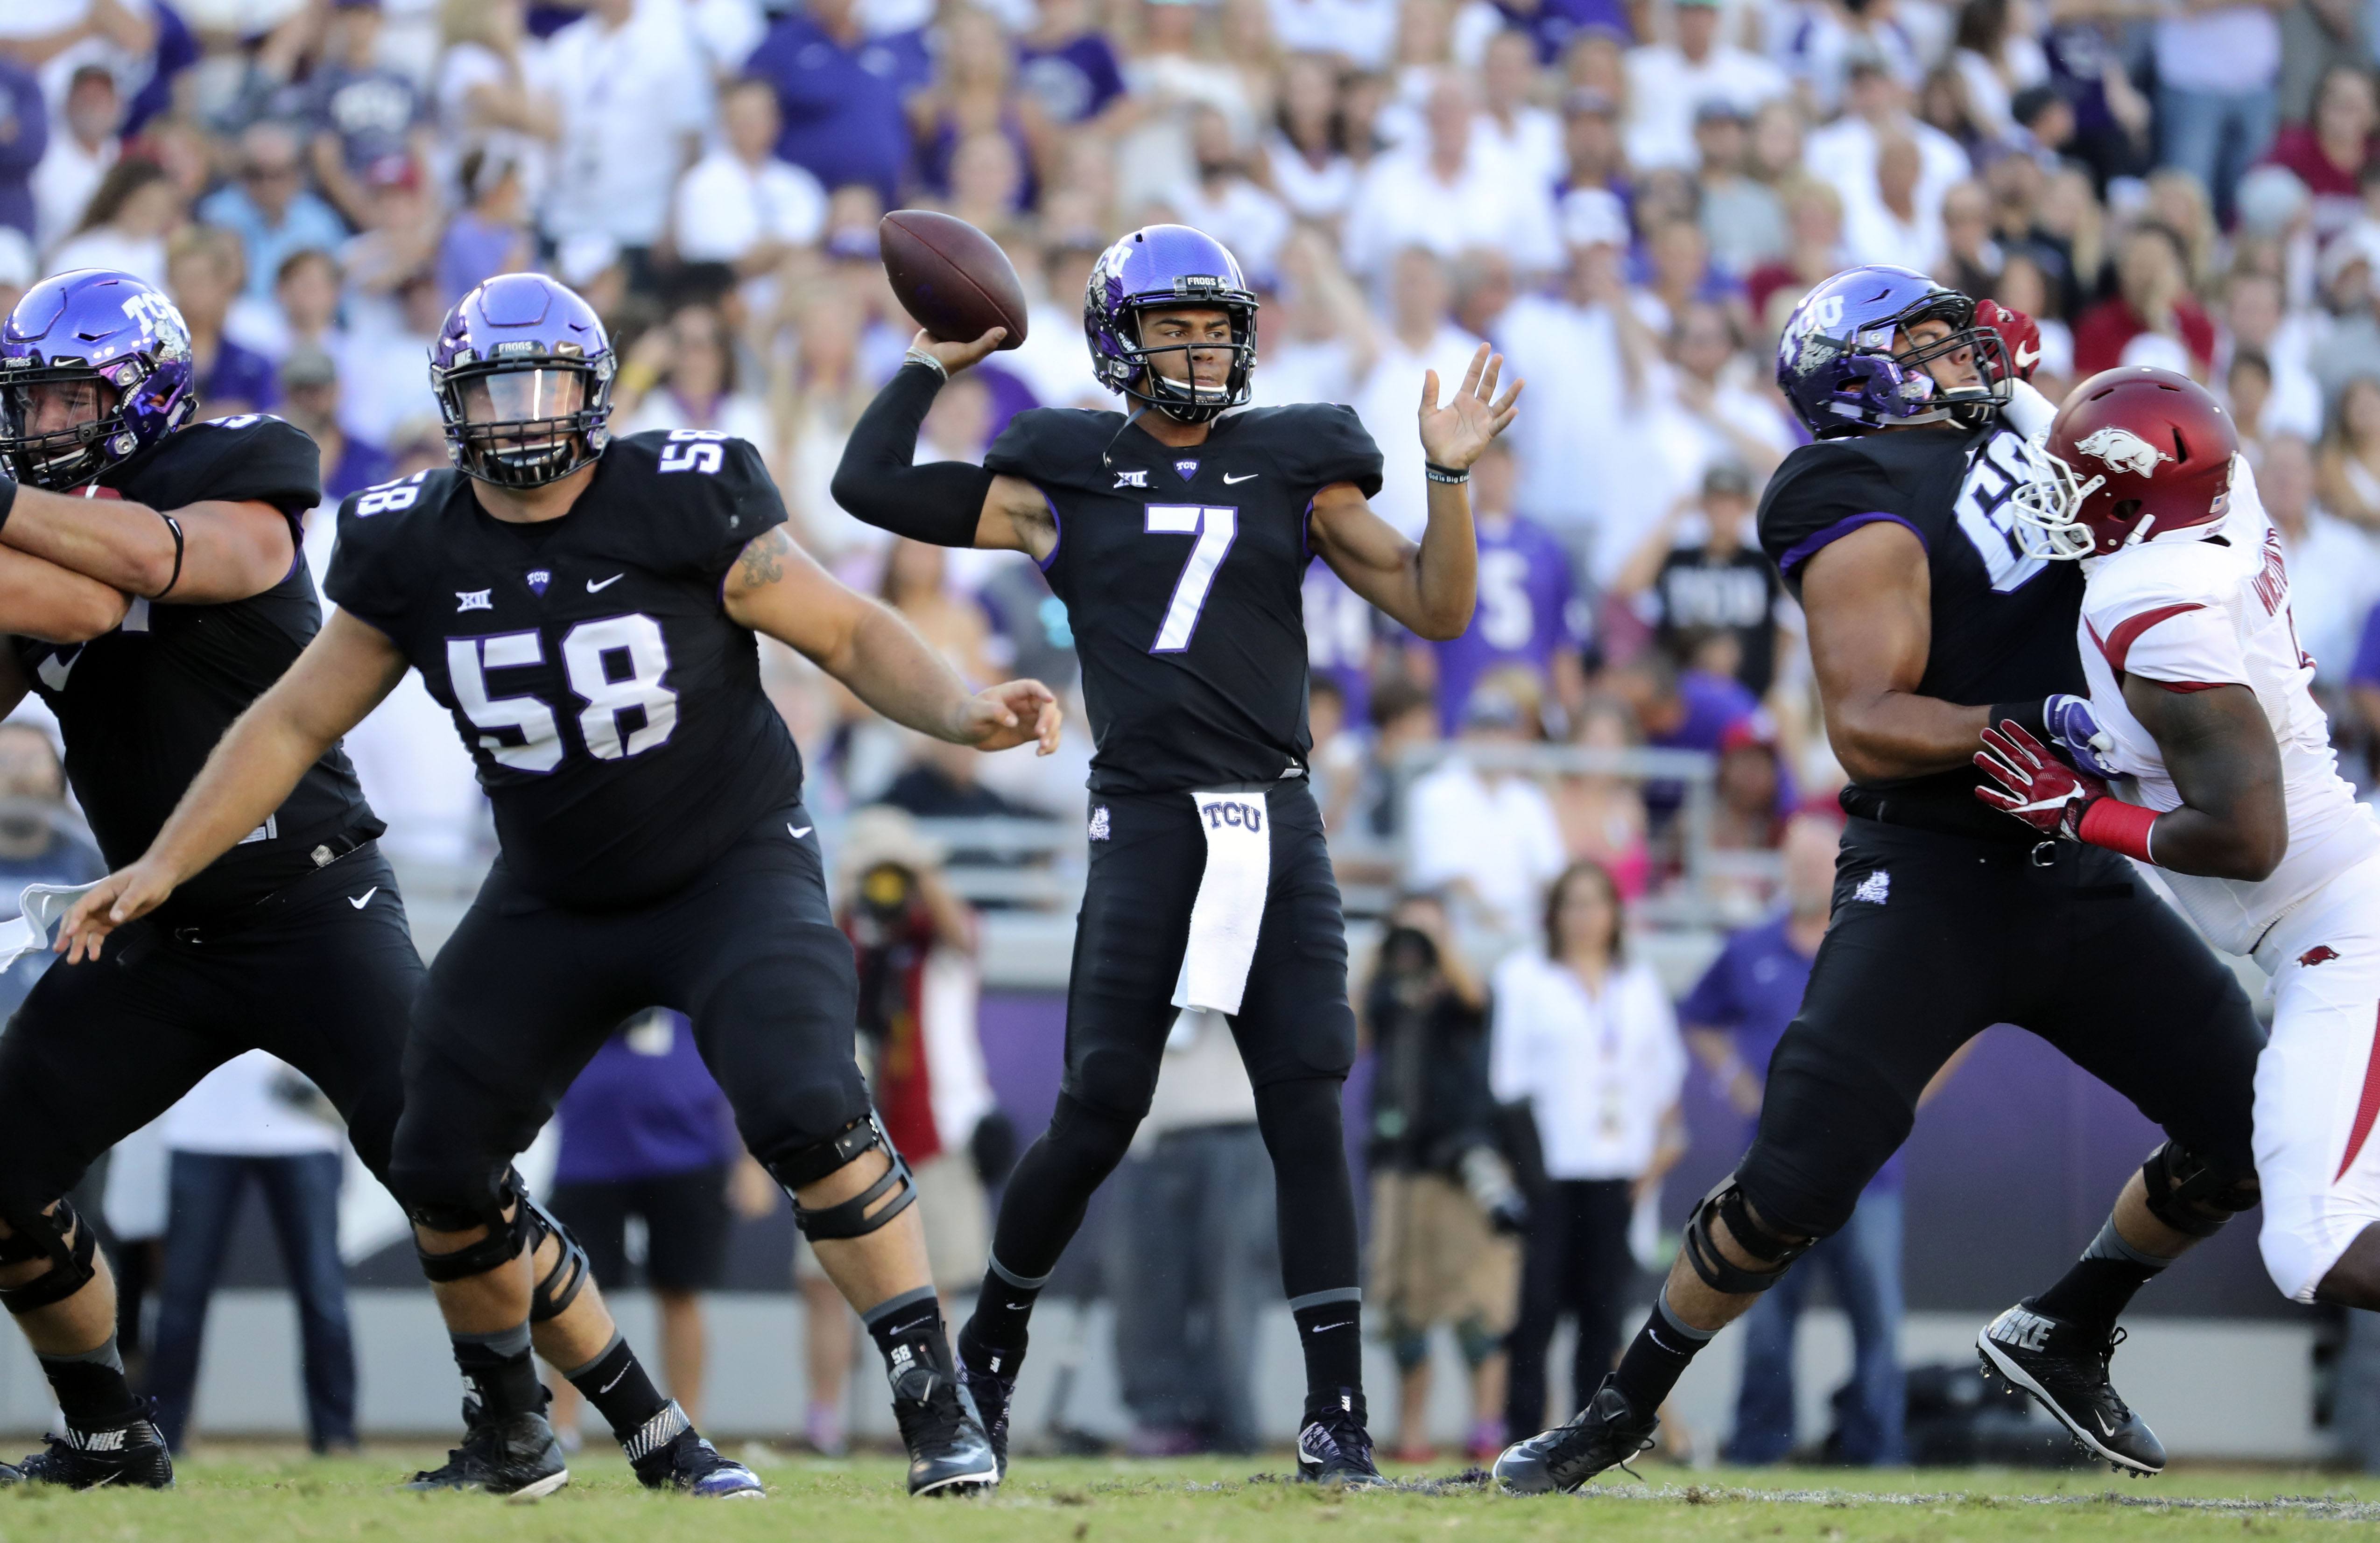 Sep 10, 2016; Fort Worth, TX, USA; TCU Horned Frogs quarterback Kenny Hill (7) throws during the first quarter against the Arkansas Razorbacks at Amon G. Carter Stadium. Mandatory Credit: Kevin Jairaj-USA TODAY Sports